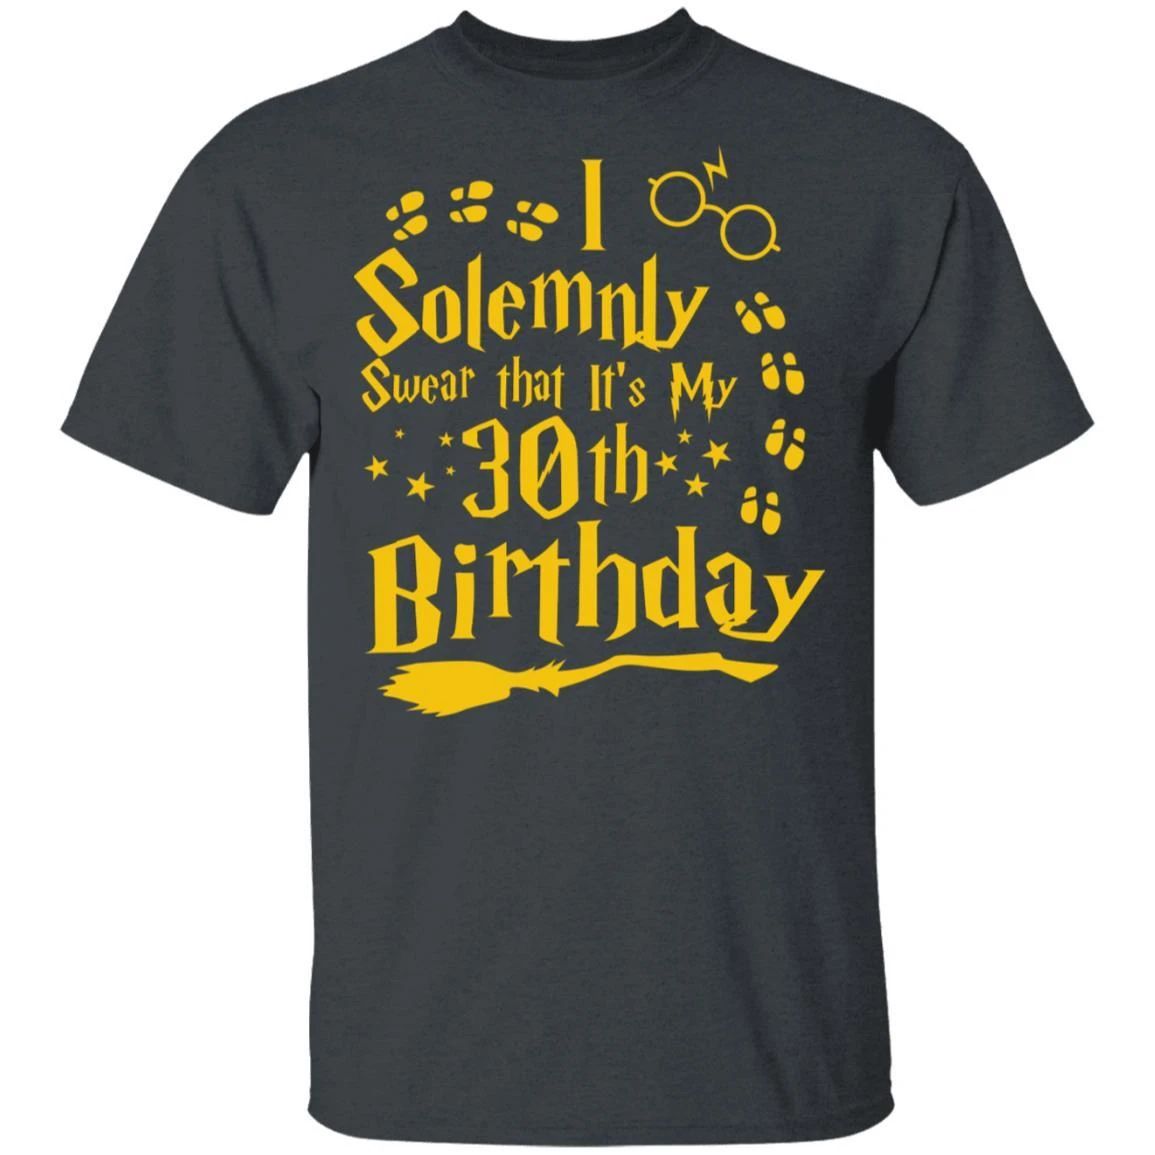 I Solemnly Swear That It's My 30th Birthday T-shirt Harry Potter Tee